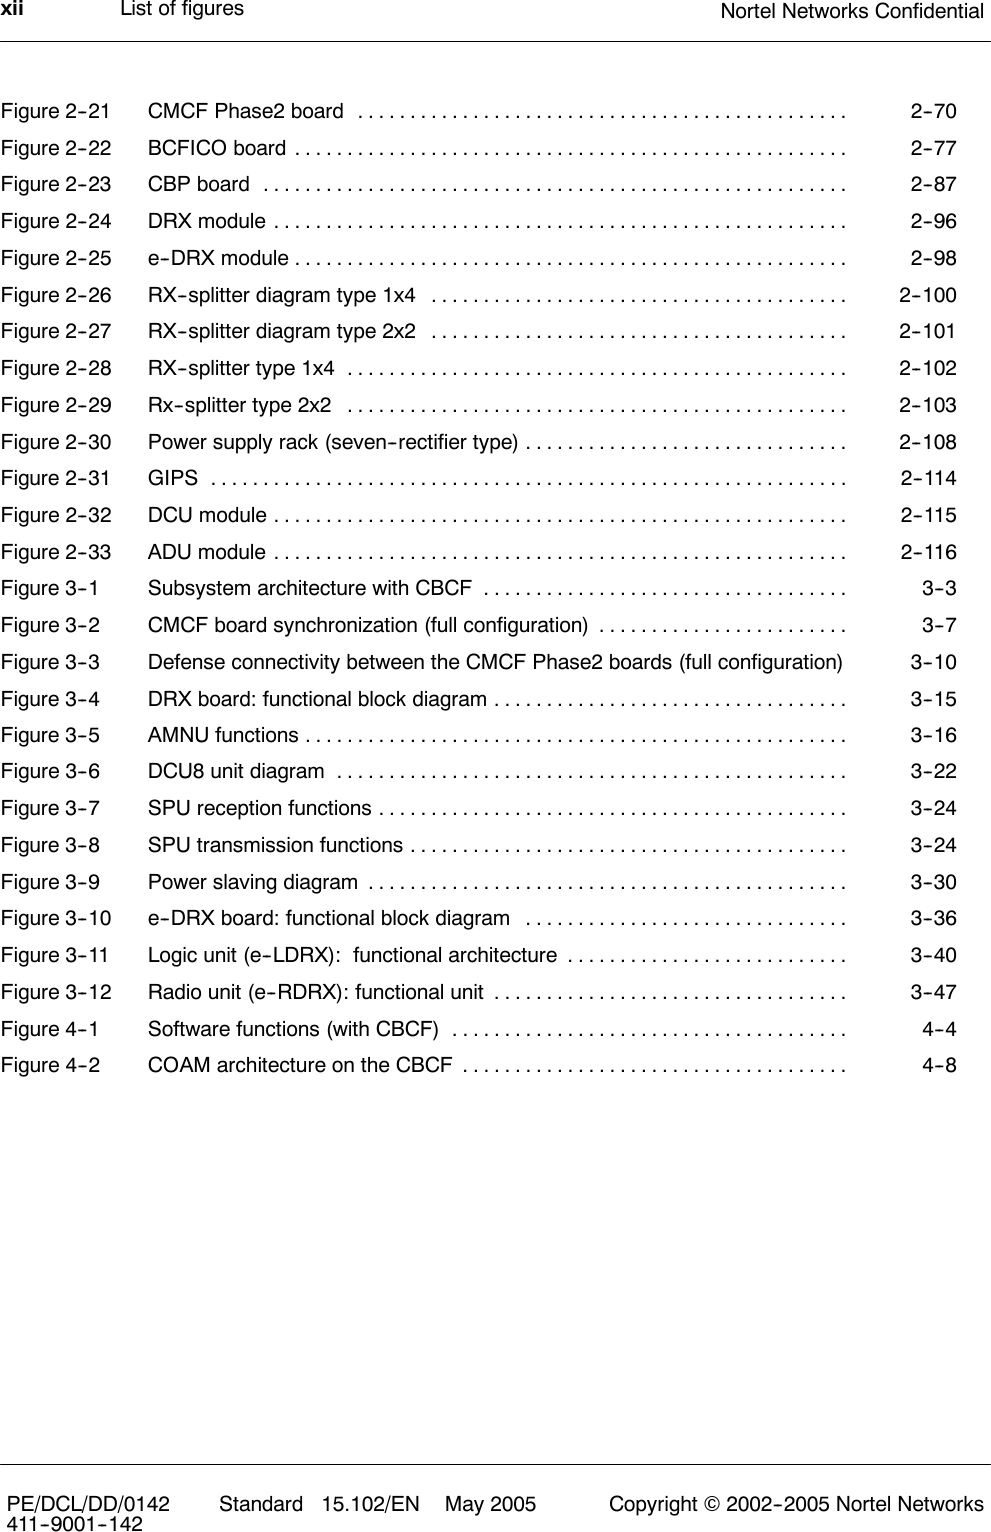 List of figures Nortel Networks ConfidentialxiiPE/DCL/DD/0142411--9001--142 Standard 15.102/EN May 2005 Copyright ©2002--2005 Nortel NetworksFigure 2--21 CMCF Phase2 board 2--70...............................................Figure 2--22 BCFICO board 2--77.....................................................Figure 2--23 CBP board 2--87........................................................Figure 2--24 DRX module 2--96.......................................................Figure 2--25 e--DRX module 2--98.....................................................Figure 2--26 RX--splitter diagram type 1x4 2--100........................................Figure 2--27 RX--splitter diagram type 2x2 2--101........................................Figure 2--28 RX--splitter type 1x4 2--102................................................Figure 2--29 Rx--splitter type 2x2 2--103................................................Figure 2--30 Power supply rack (seven--rectifier type) 2--108...............................Figure 2--31 GIPS 2--114.............................................................Figure 2--32 DCU module 2--115.......................................................Figure 2--33 ADU module 2--116.......................................................Figure 3--1 Subsystem architecture with CBCF 3--3...................................Figure 3--2 CMCF board synchronization (full configuration) 3--7........................Figure 3--3 Defense connectivity between the CMCF Phase2 boards (full configuration) 3--10Figure 3--4 DRX board: functional block diagram 3--15..................................Figure 3--5 AMNU functions 3--16....................................................Figure 3--6 DCU8 unit diagram 3--22.................................................Figure 3--7 SPU reception functions 3--24.............................................Figure 3--8 SPU transmission functions 3--24..........................................Figure 3--9 Power slaving diagram 3--30..............................................Figure 3--10 e--DRX board: functional block diagram 3--36...............................Figure 3--11 Logic unit (e--LDRX): functional architecture 3--40...........................Figure 3--12 Radio unit (e--RDRX): functional unit 3--47..................................Figure 4--1 Software functions (with CBCF) 4--4......................................Figure 4--2 COAM architecture on the CBCF 4--8.....................................